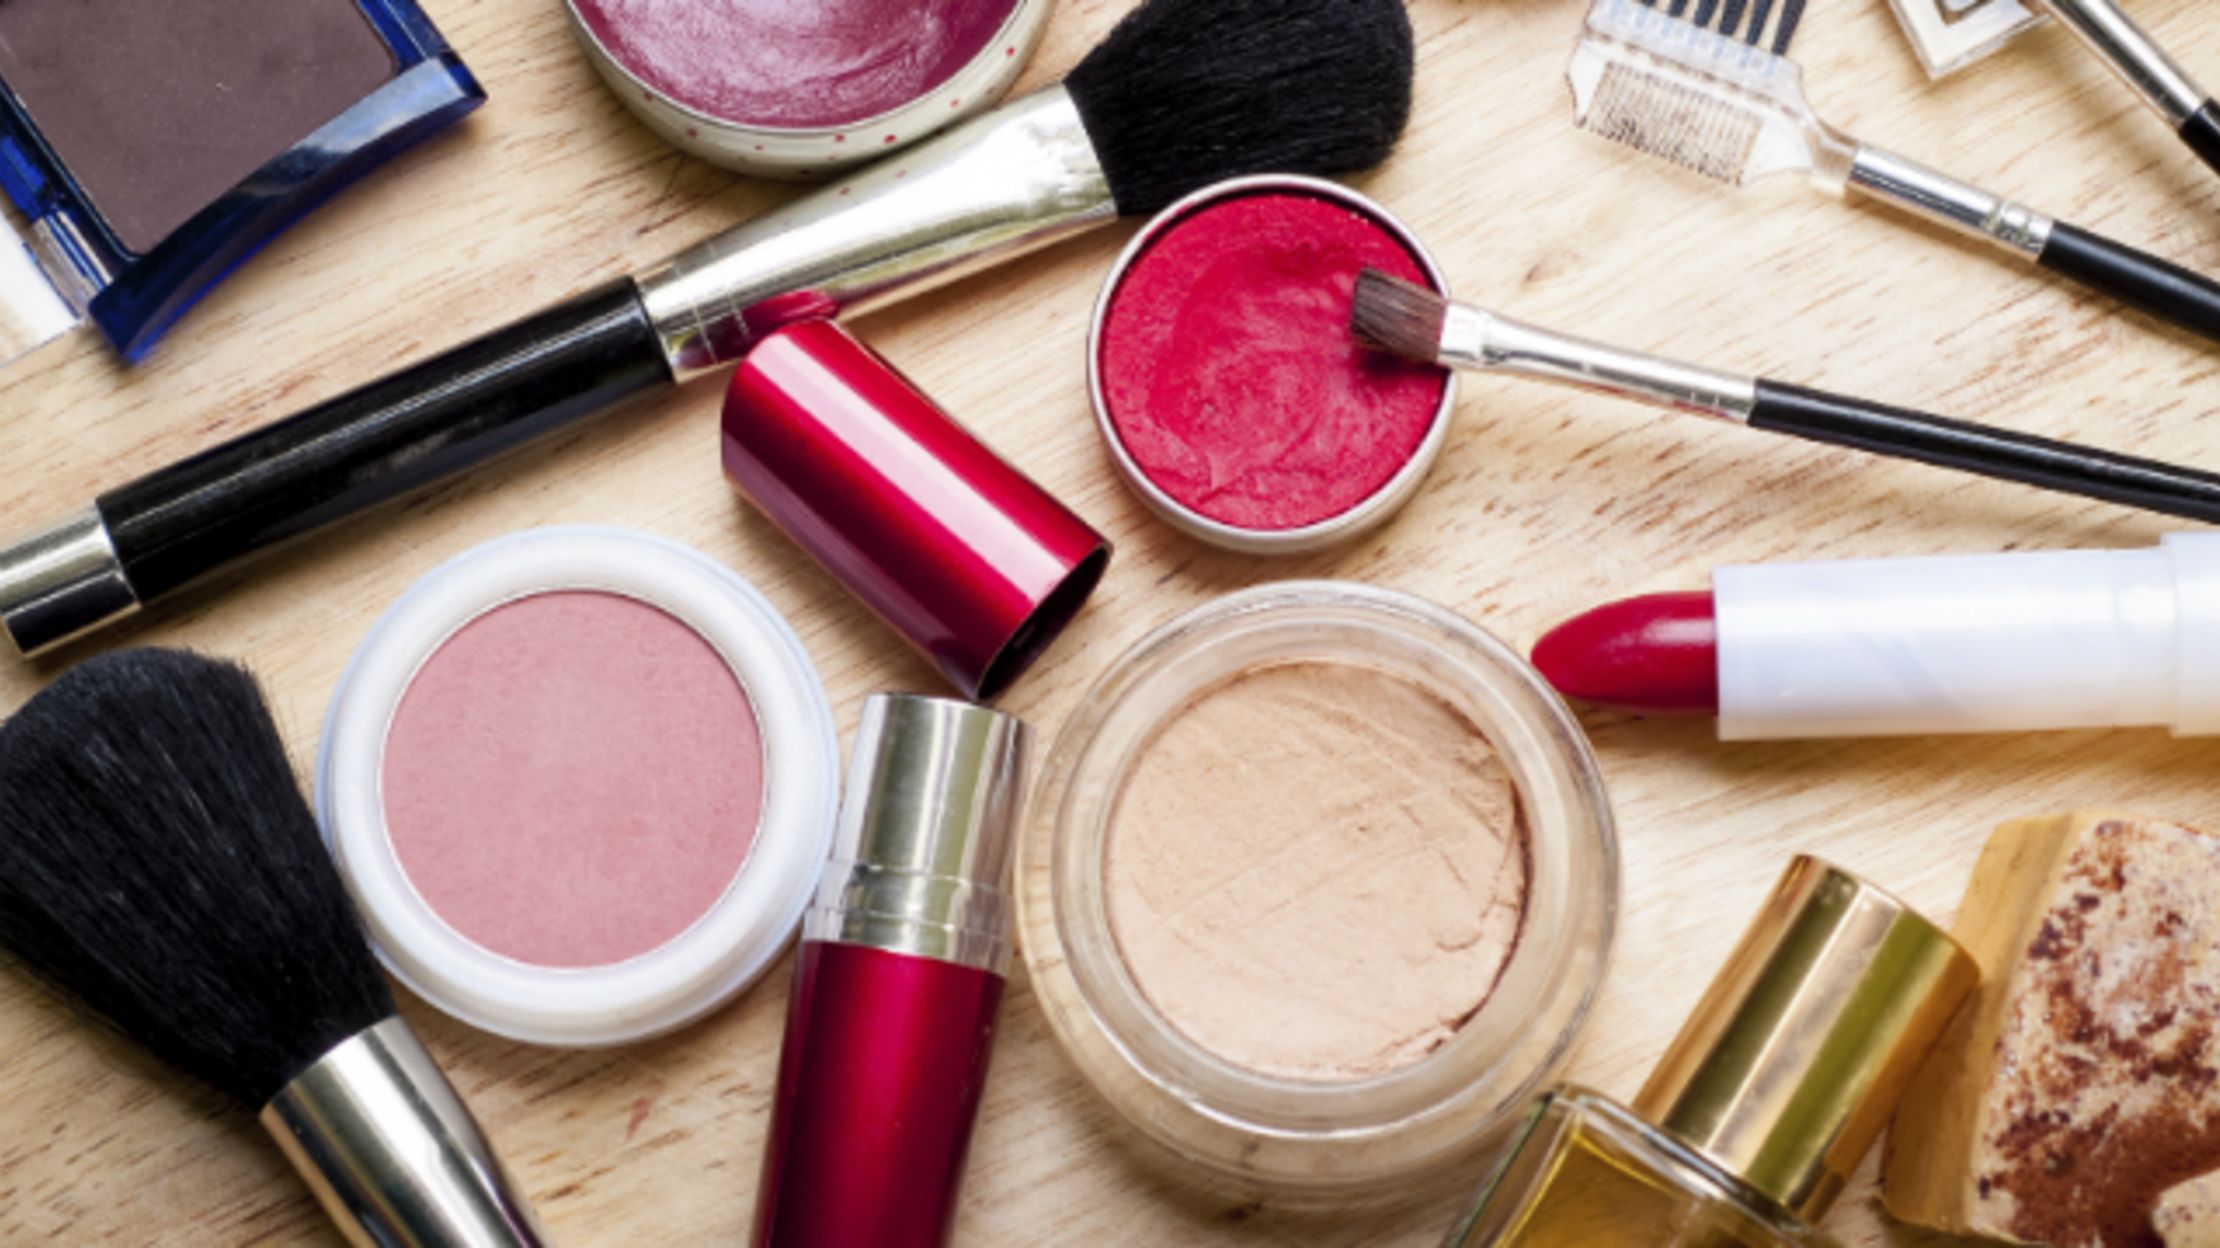 When Should I Throw Out My Makeup? | Mental Floss